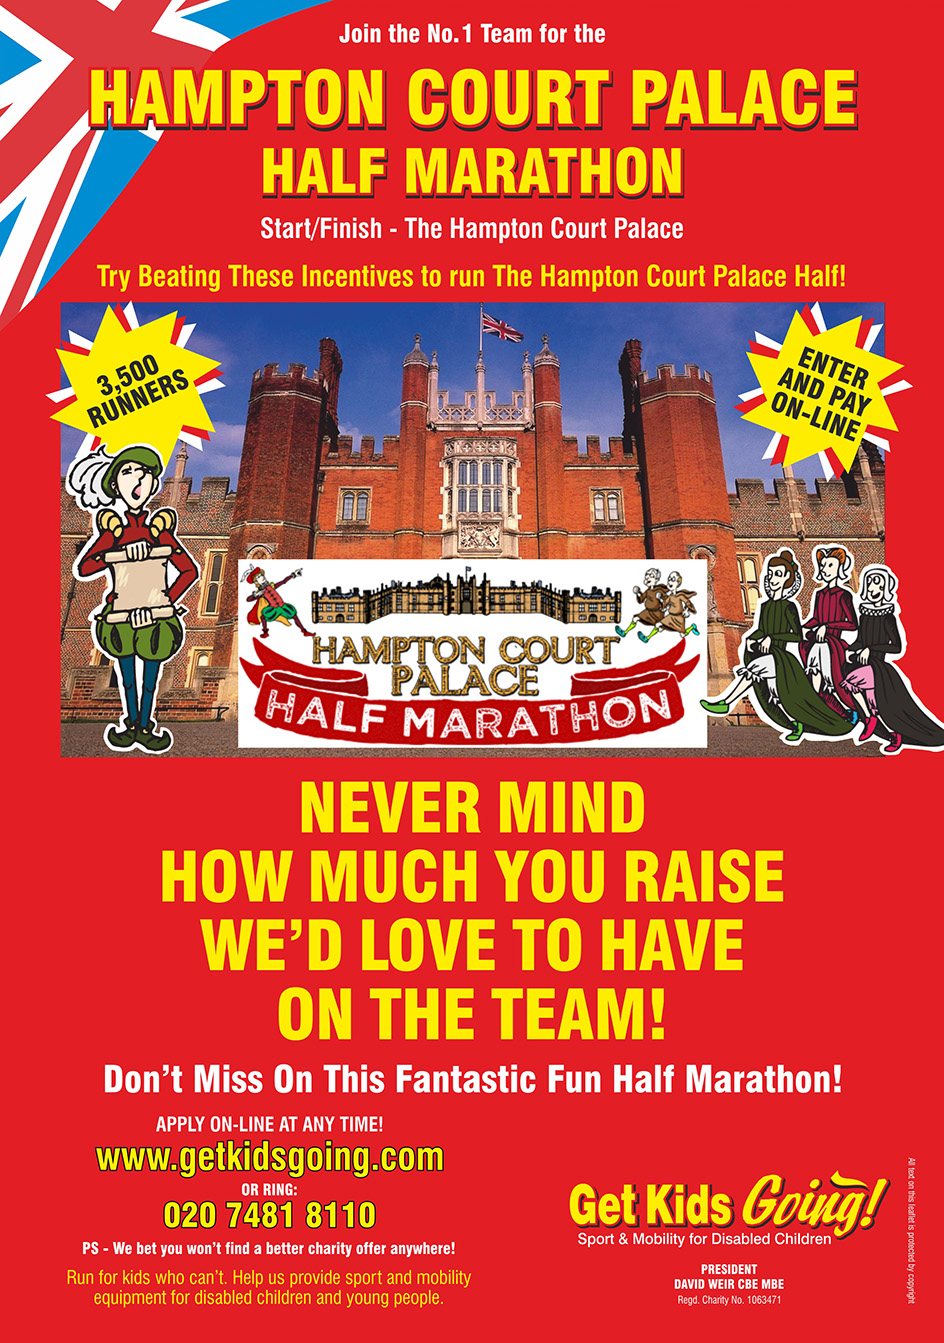 We have hundreds of guaranteed entry places available for the Hampton Court Palace Half Marathon just waiting to be filled!

Get Kids Going! is a unique, national charity that gives disabled children and young people the wonderful opportunity of participating in sport. Help us to Turn their Dreams Into Reality